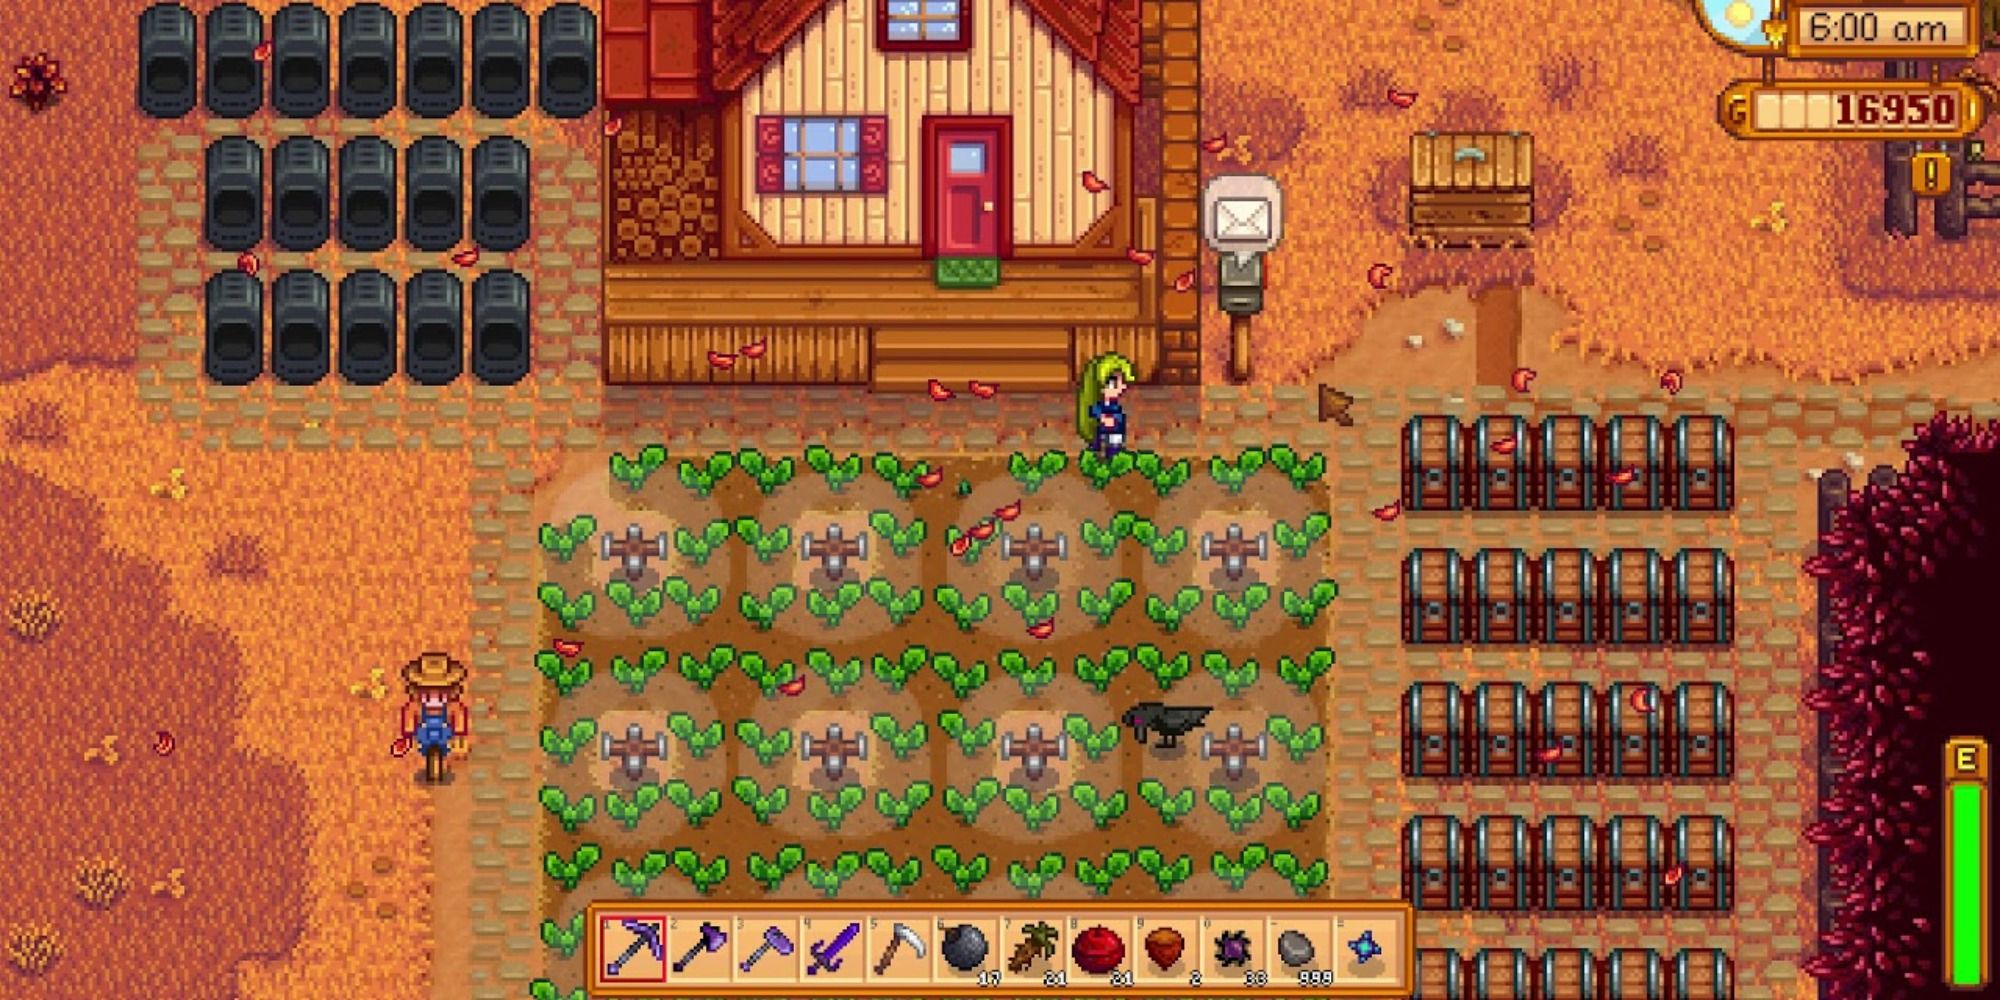 Stardew Valley crow eating some crops because the scarecrow is too far away